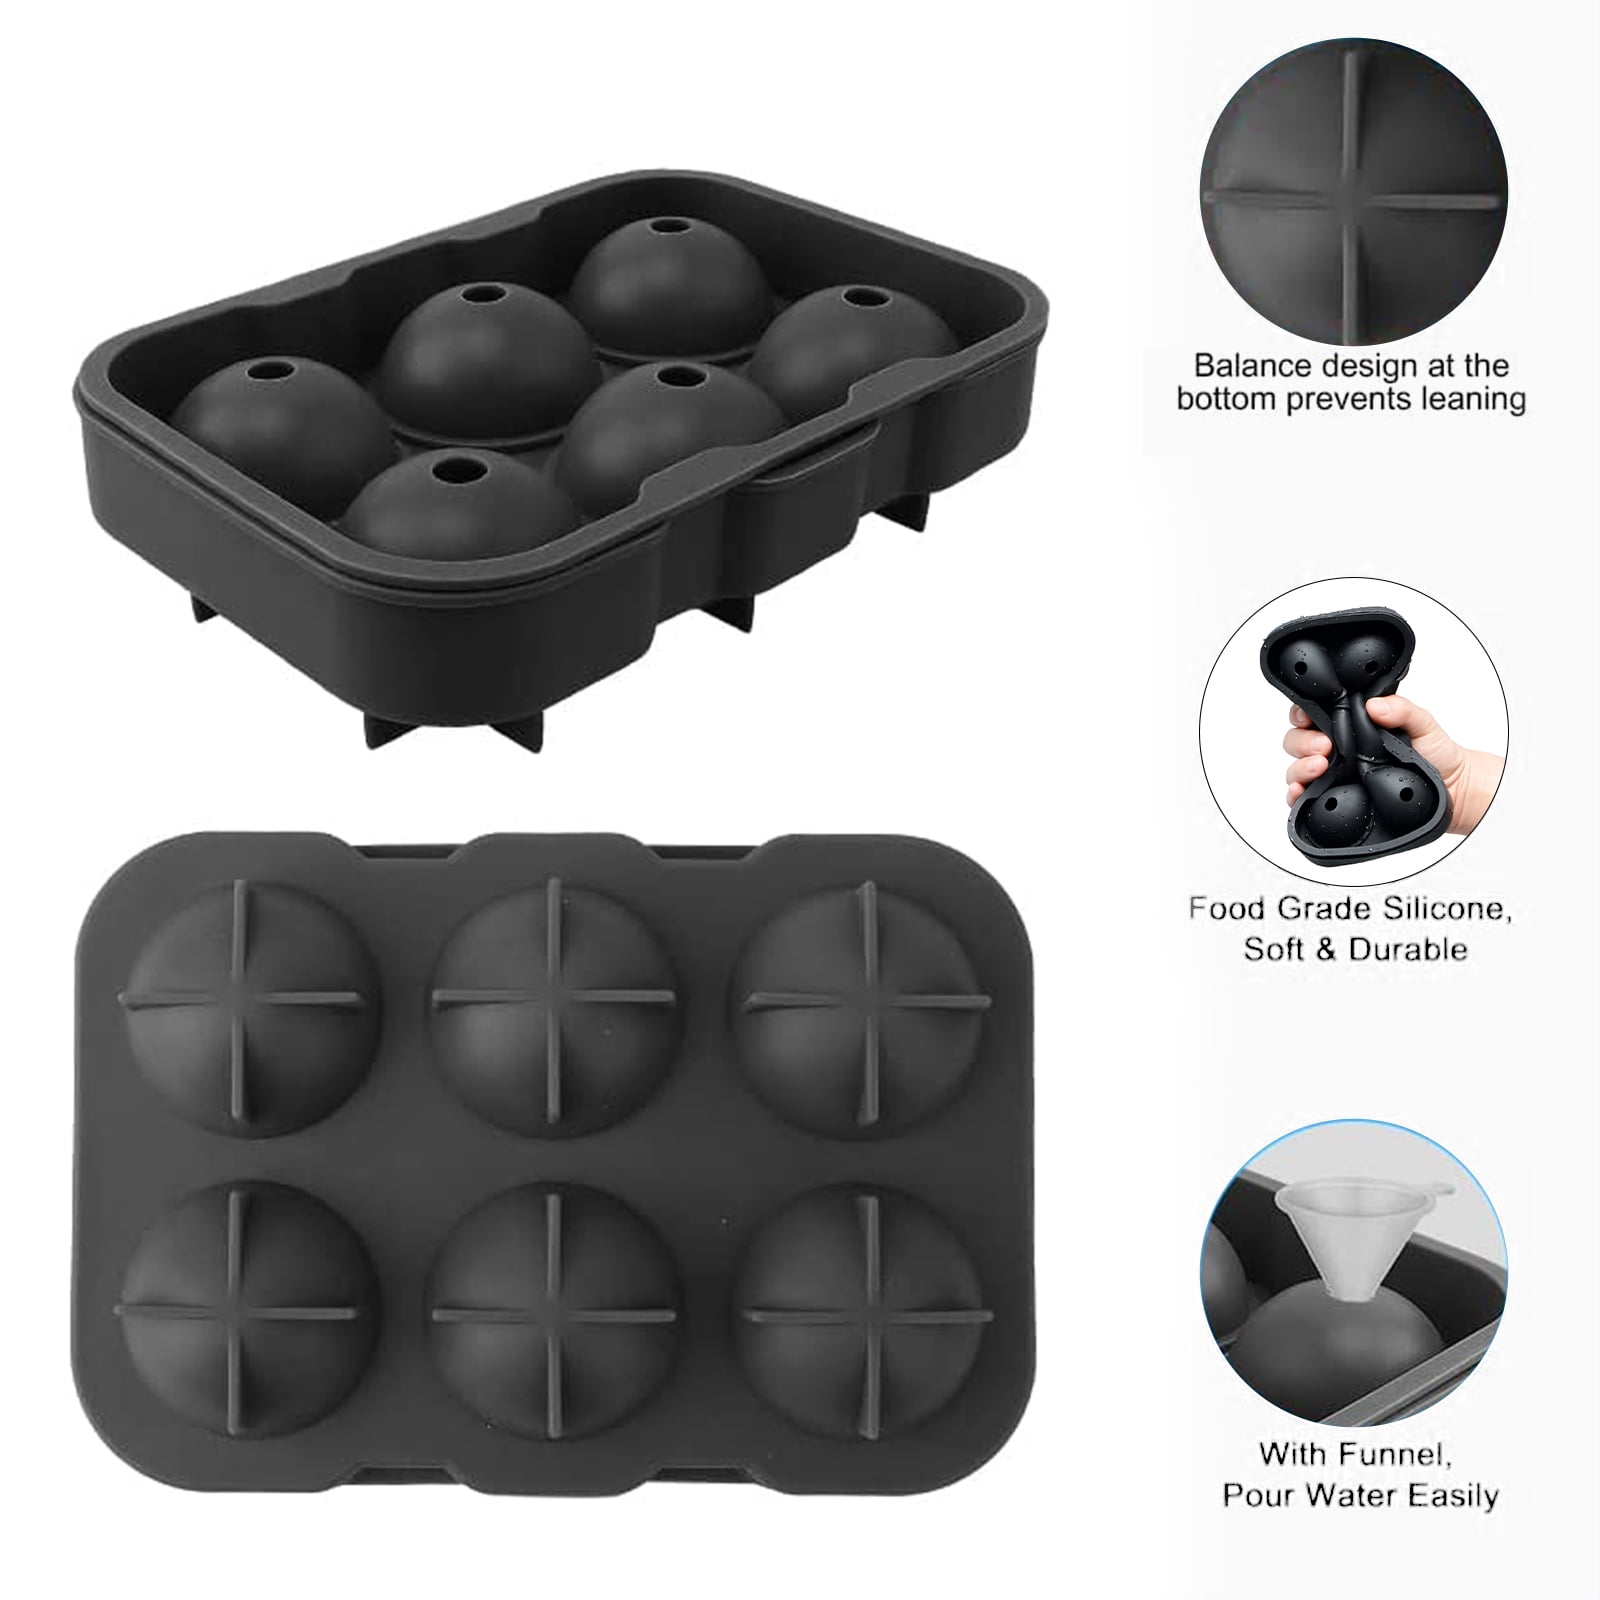 Kitchen & Table by H-E-B Silicone Sphere Ice Molds - Black